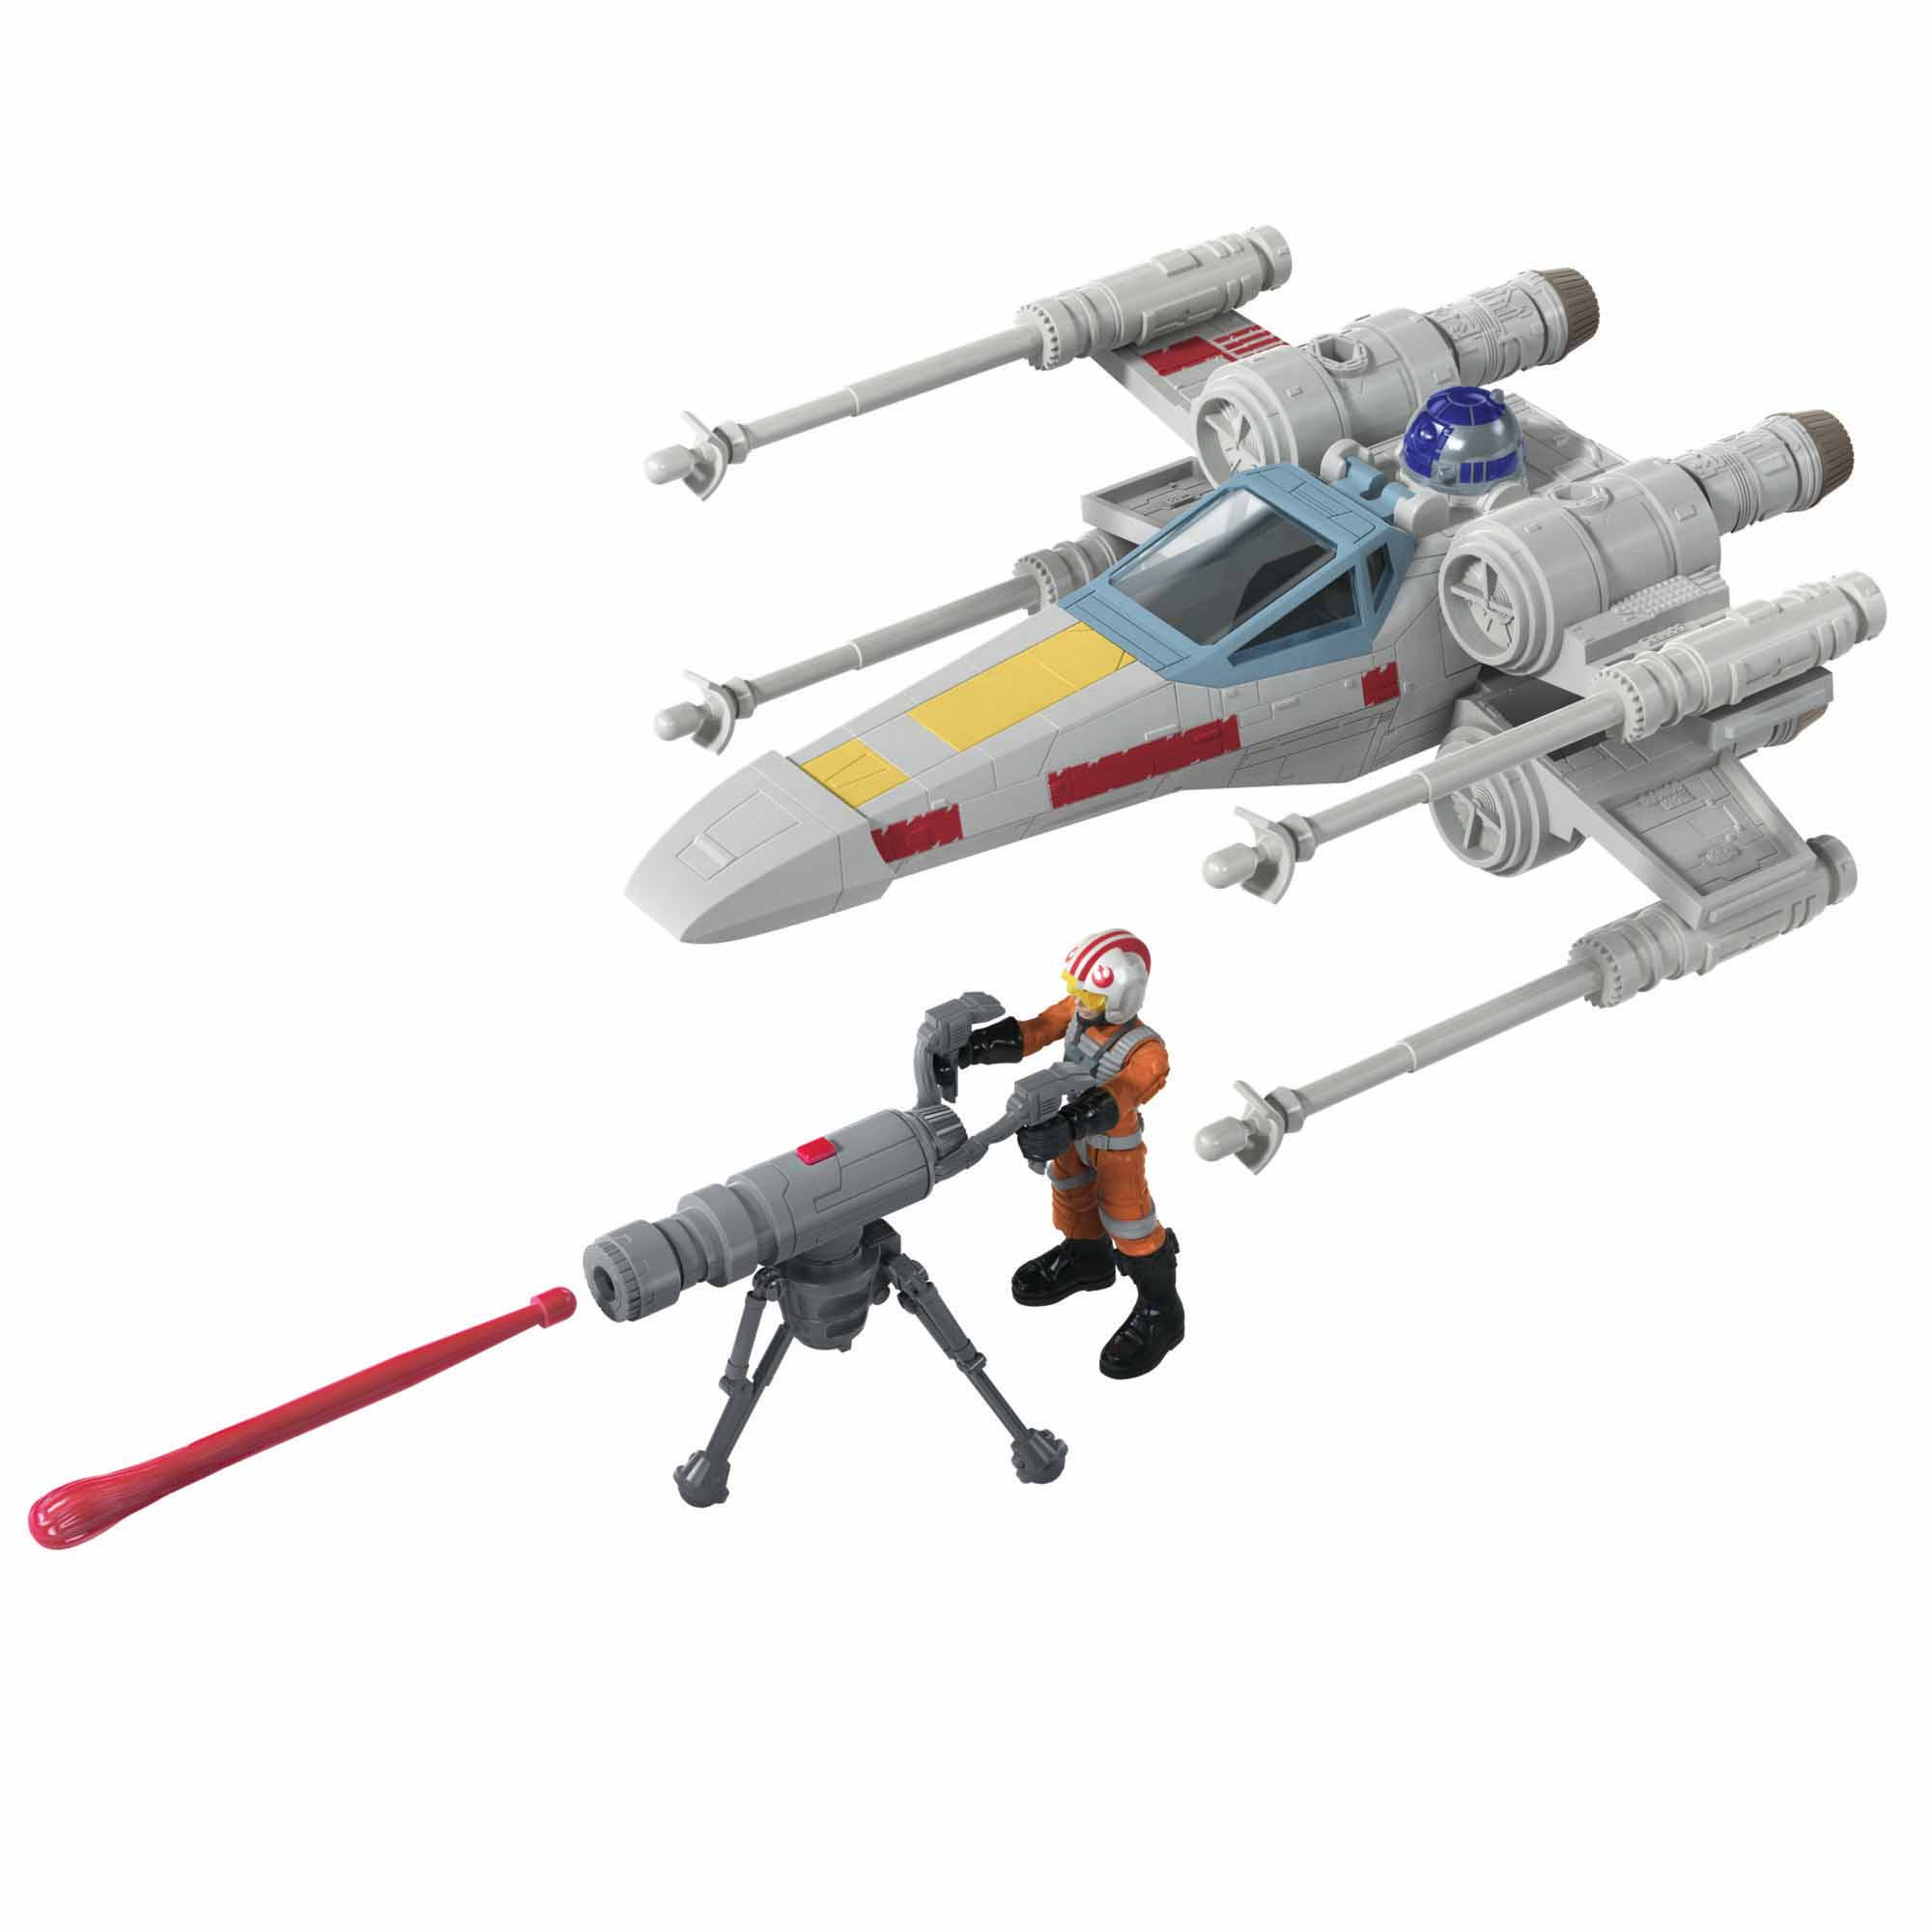 Star Wars Mission Fleet Stellar Class Luke Skywalker X-wing Fighter 2.5-Inch-Scale Figure and Vehicle, Ages 4 and Up